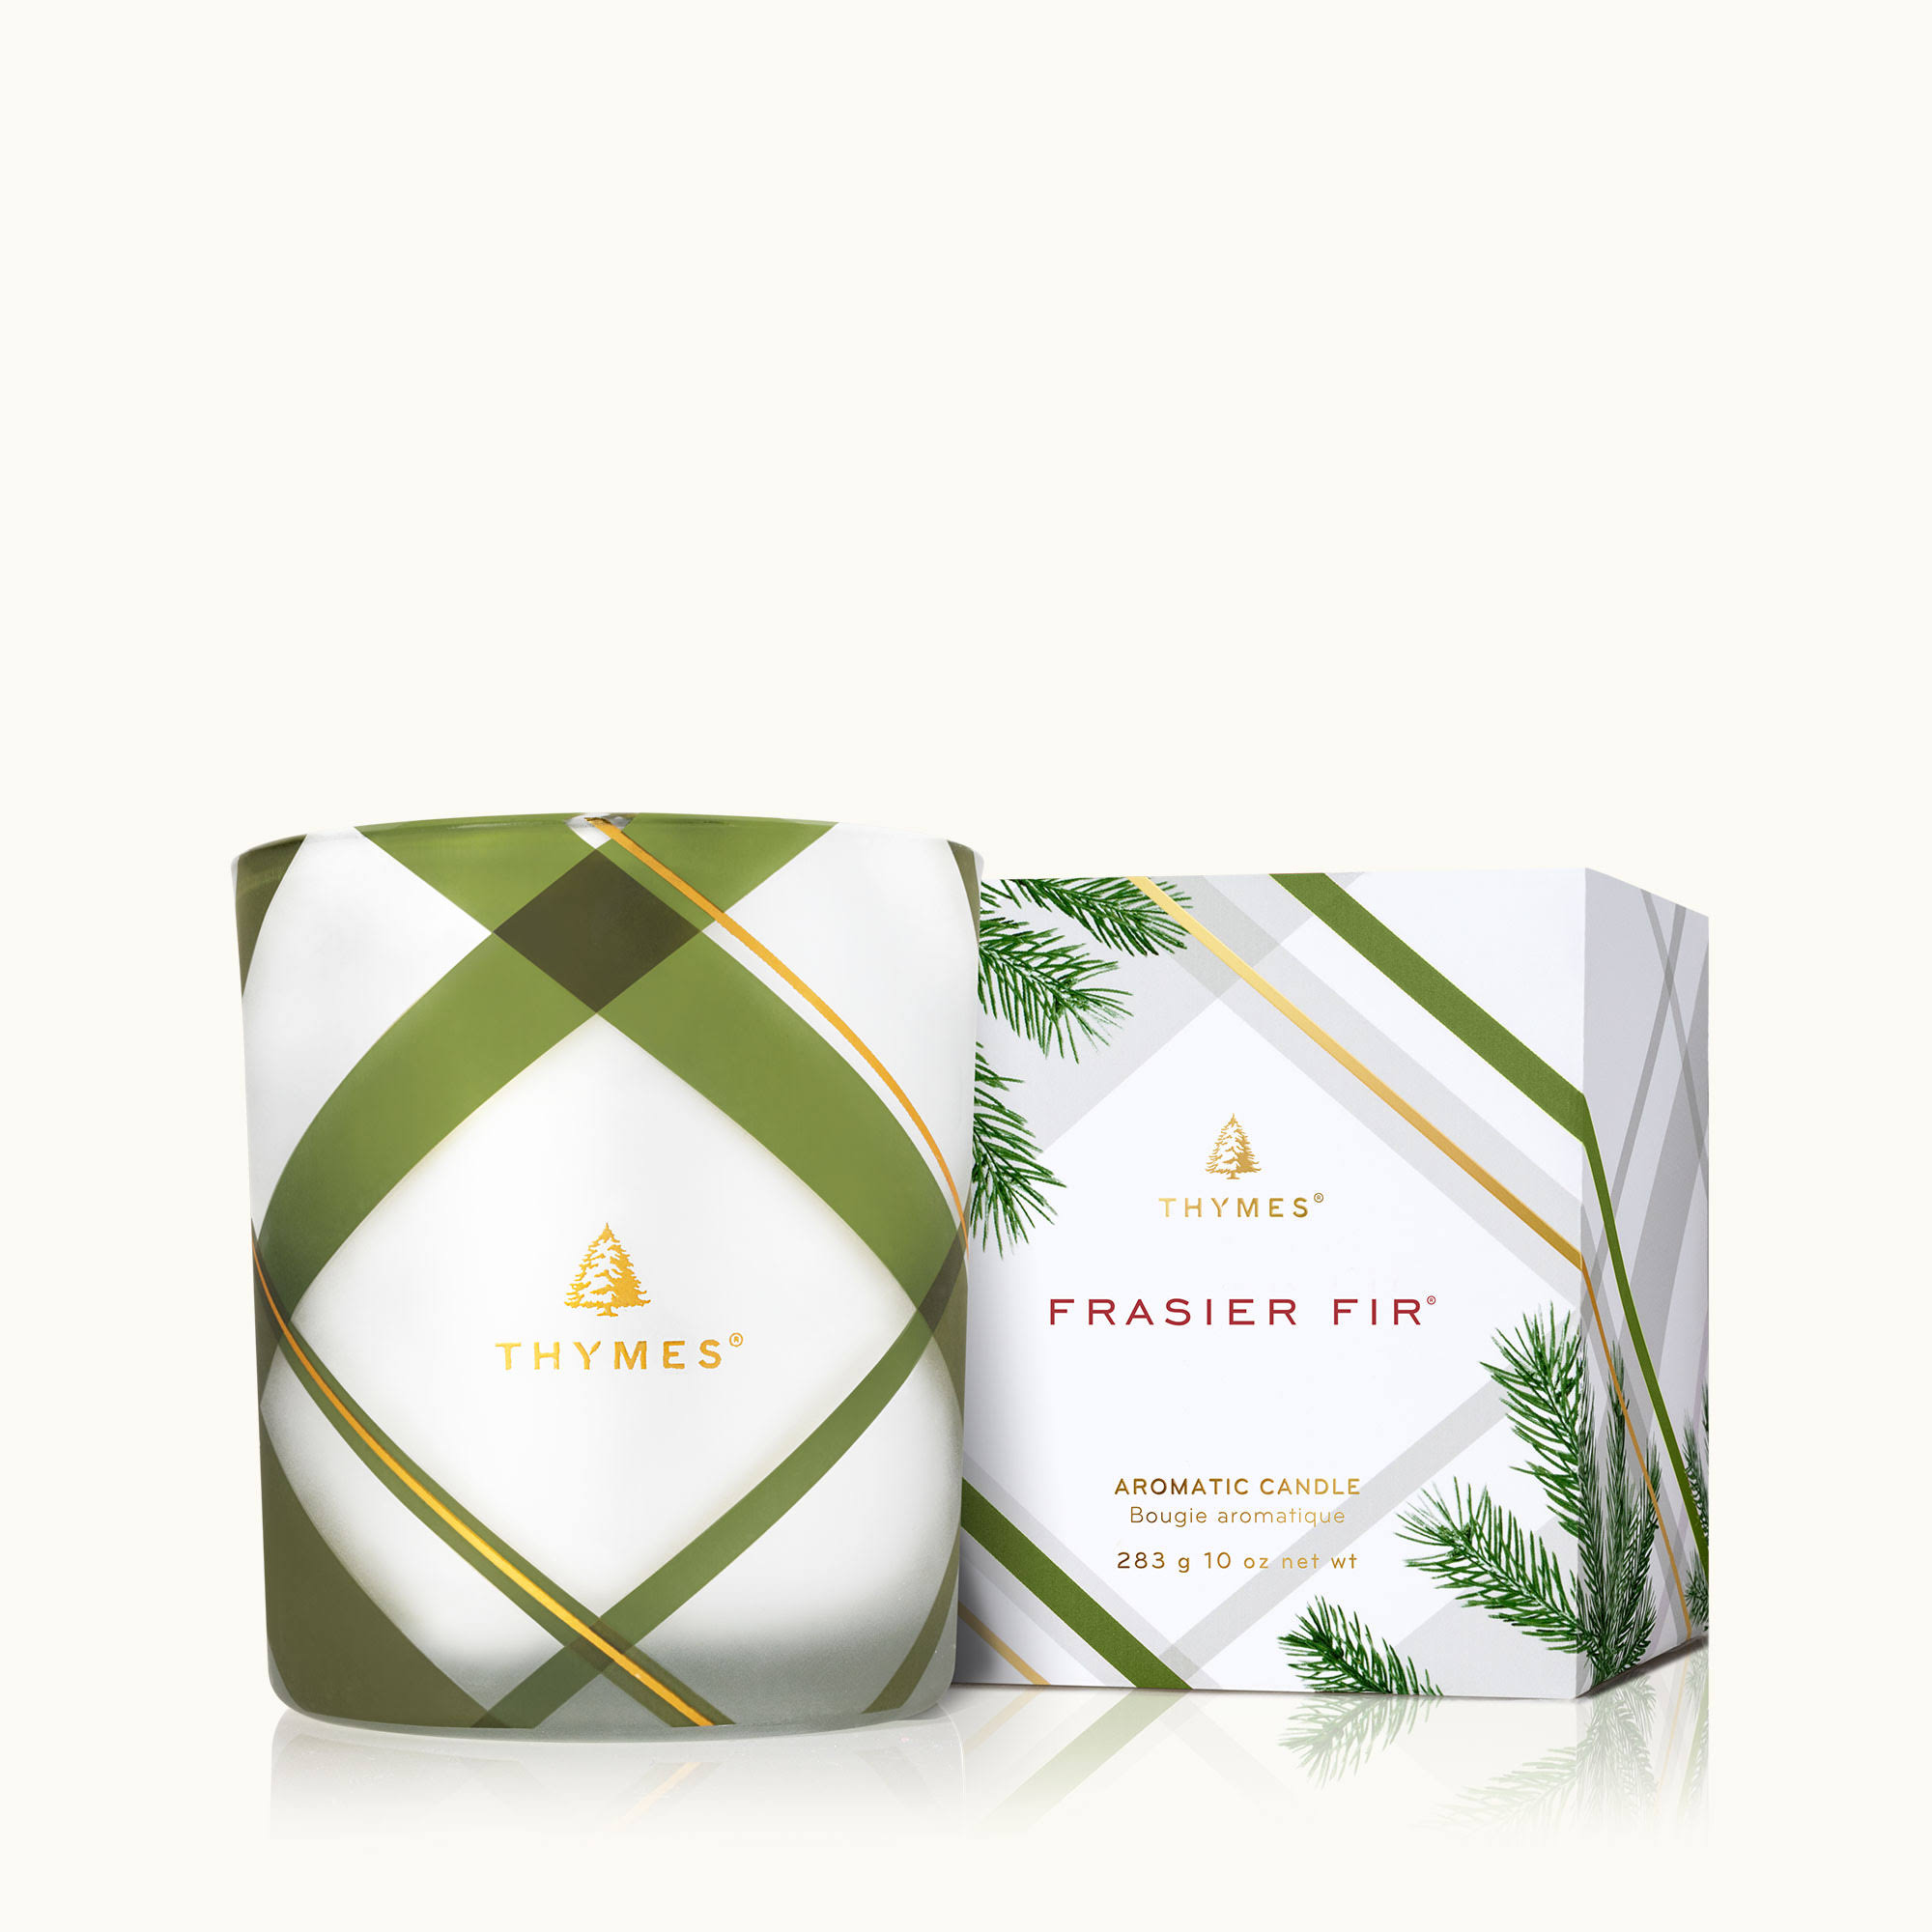 Thymes Frasier Fir Frosted Plaid Medium Poured Candle